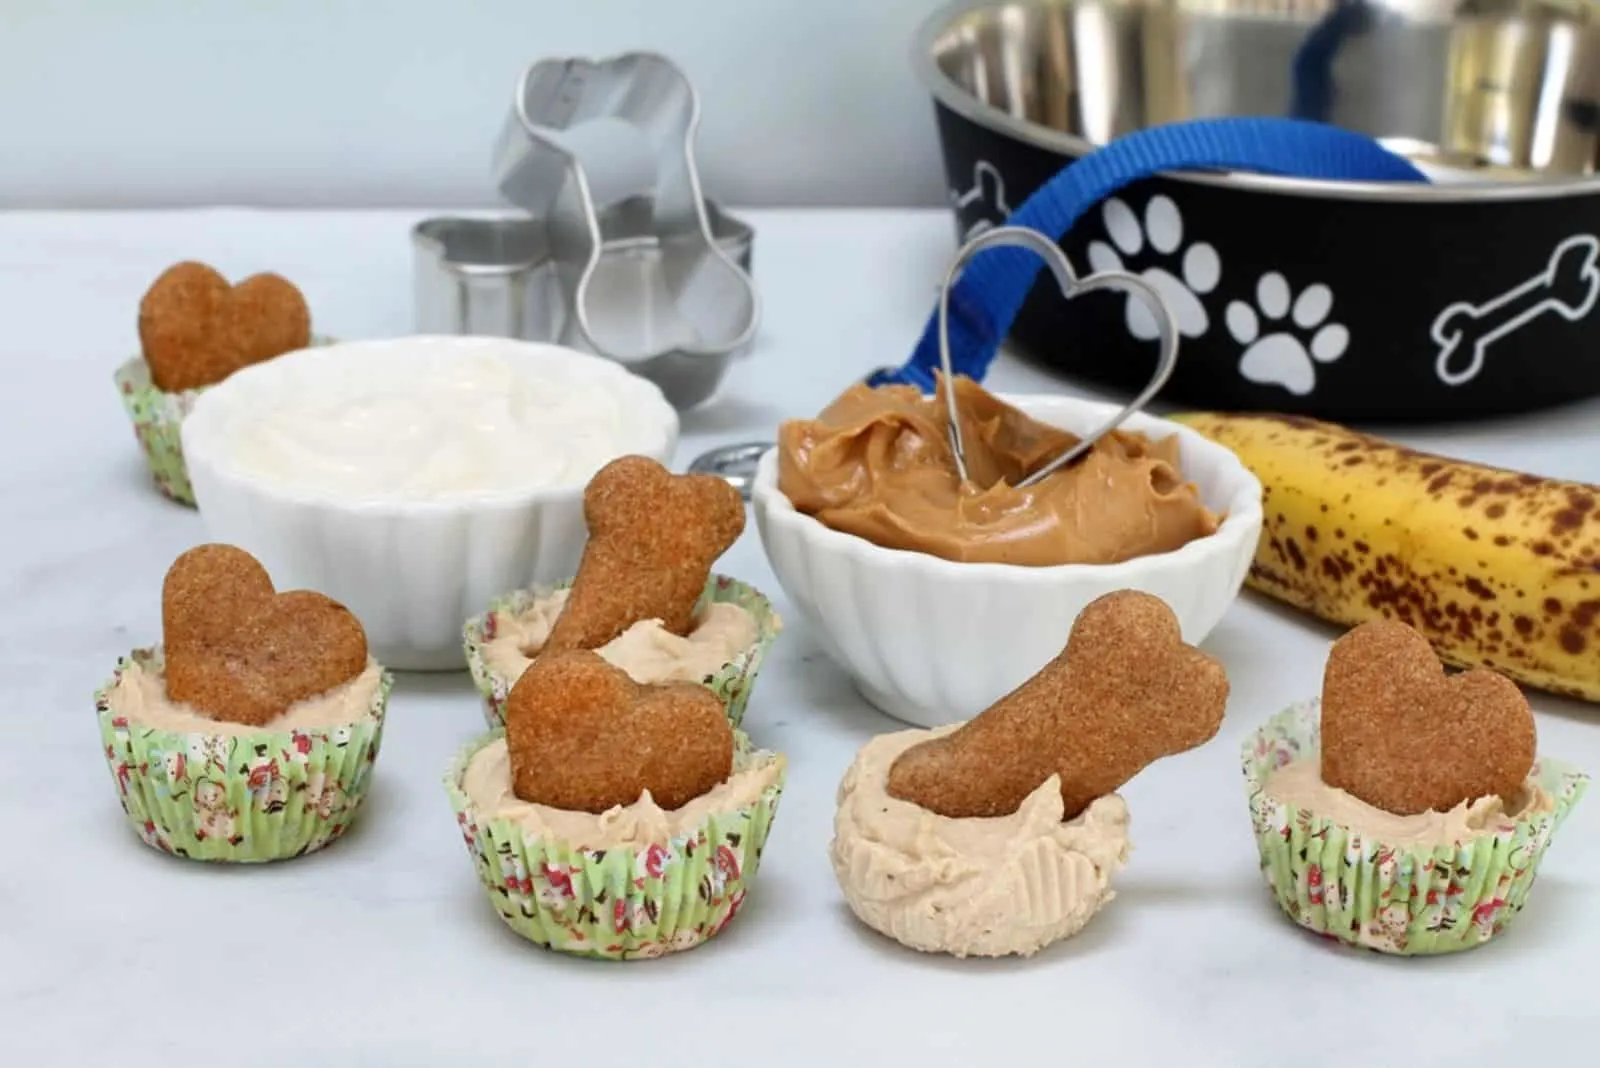 Homemade frozen dog ice cream cupcakes with a biscuit in the center